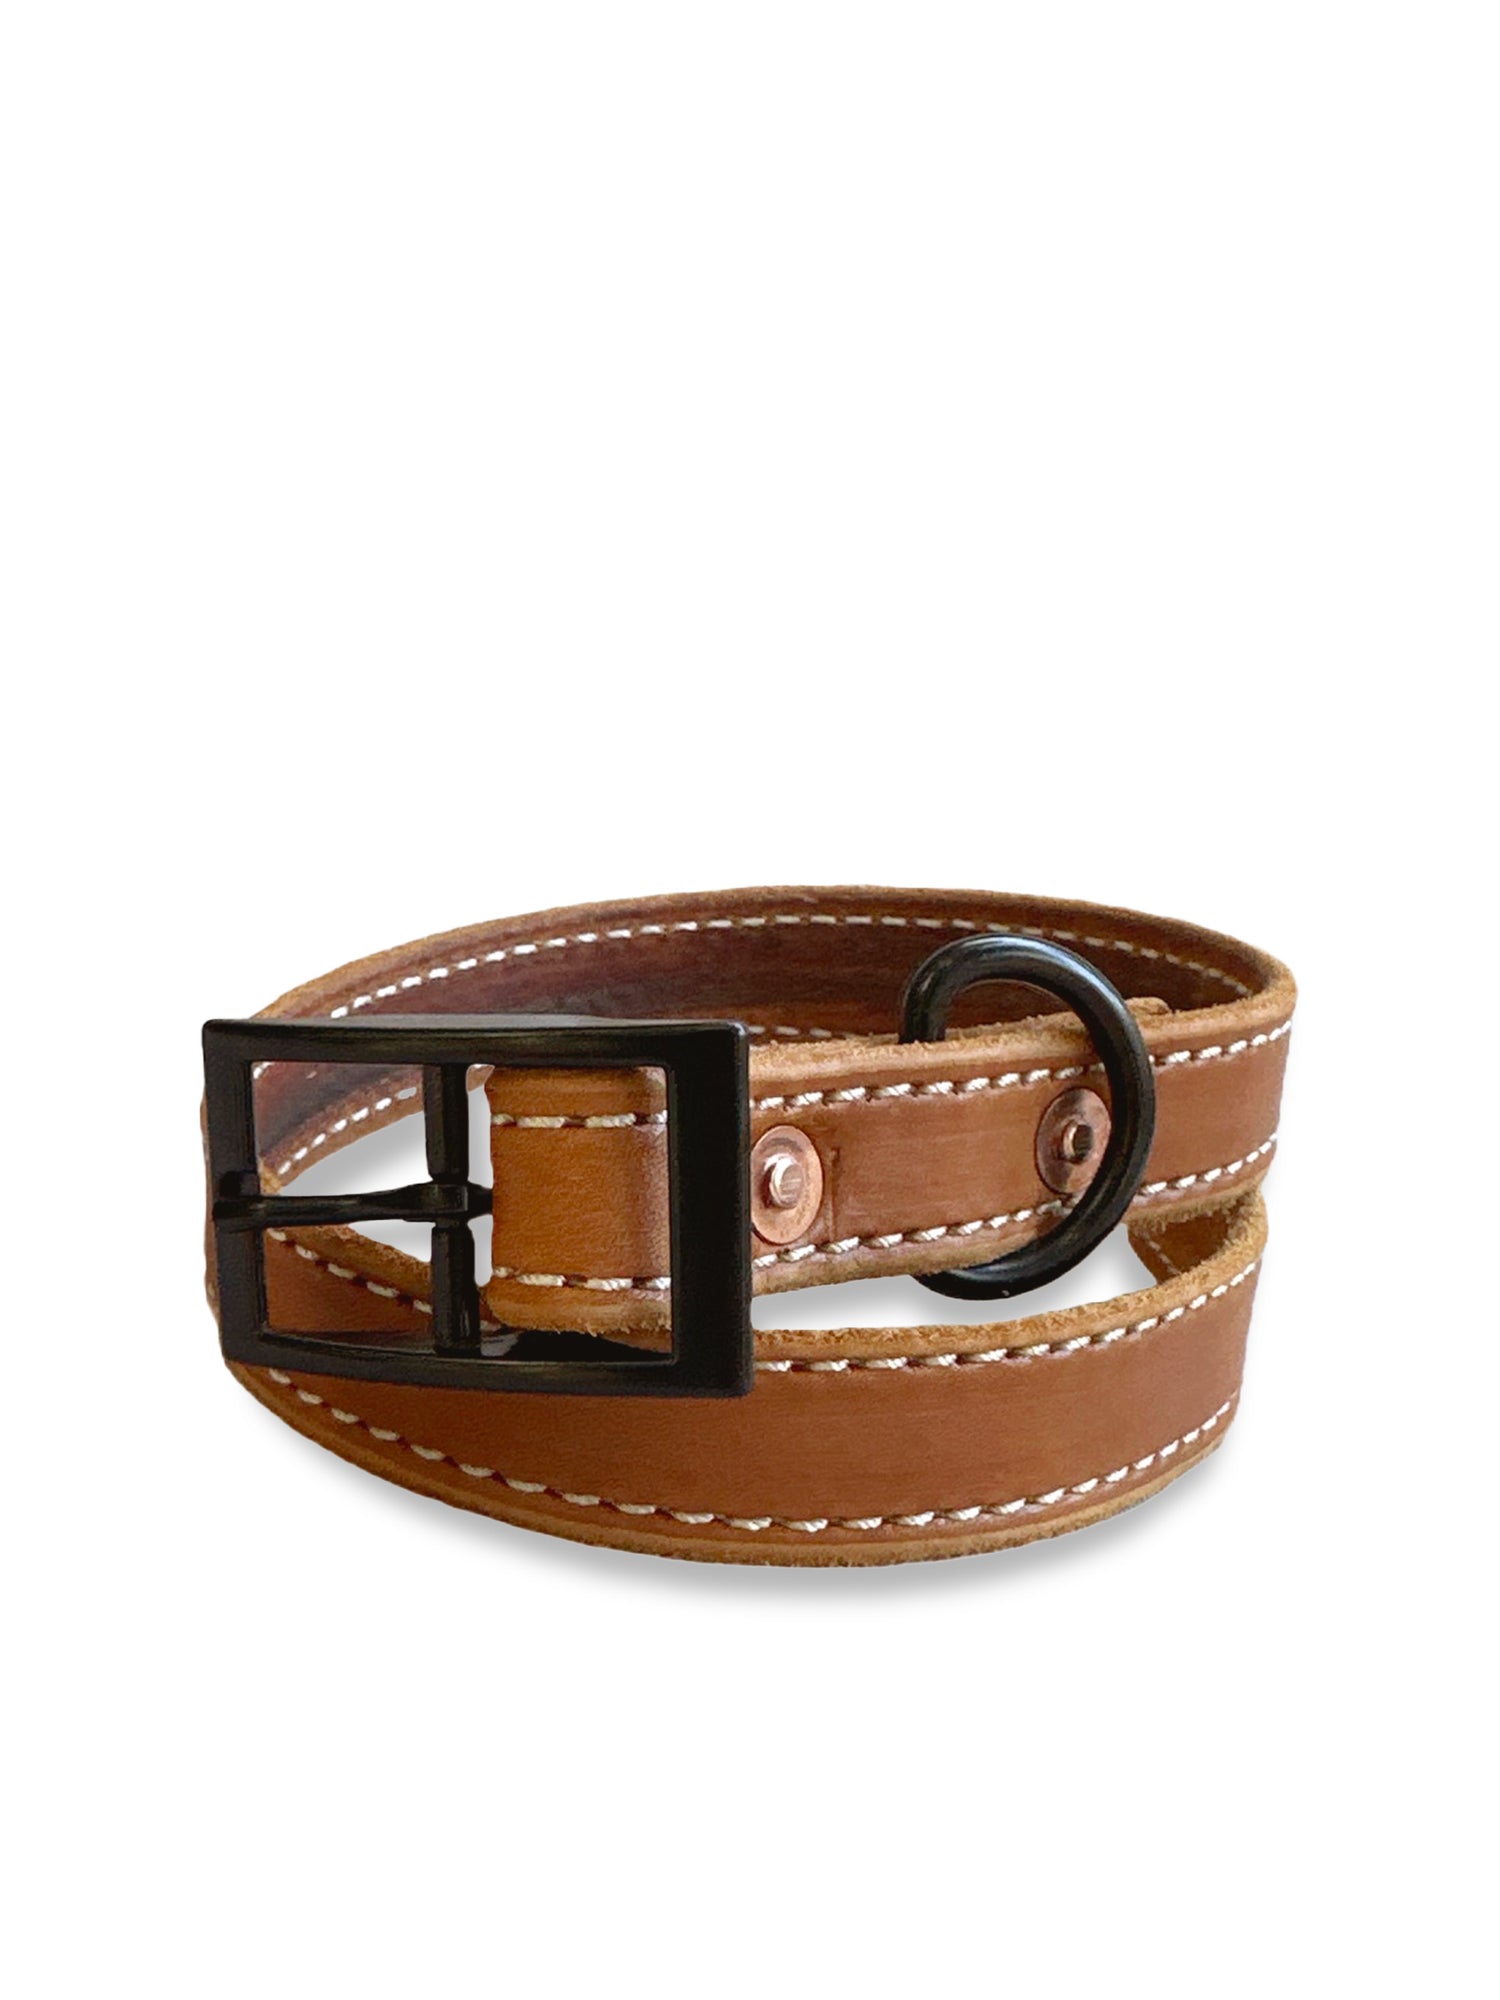 Full Grain Leather Dog Collar with Stitching